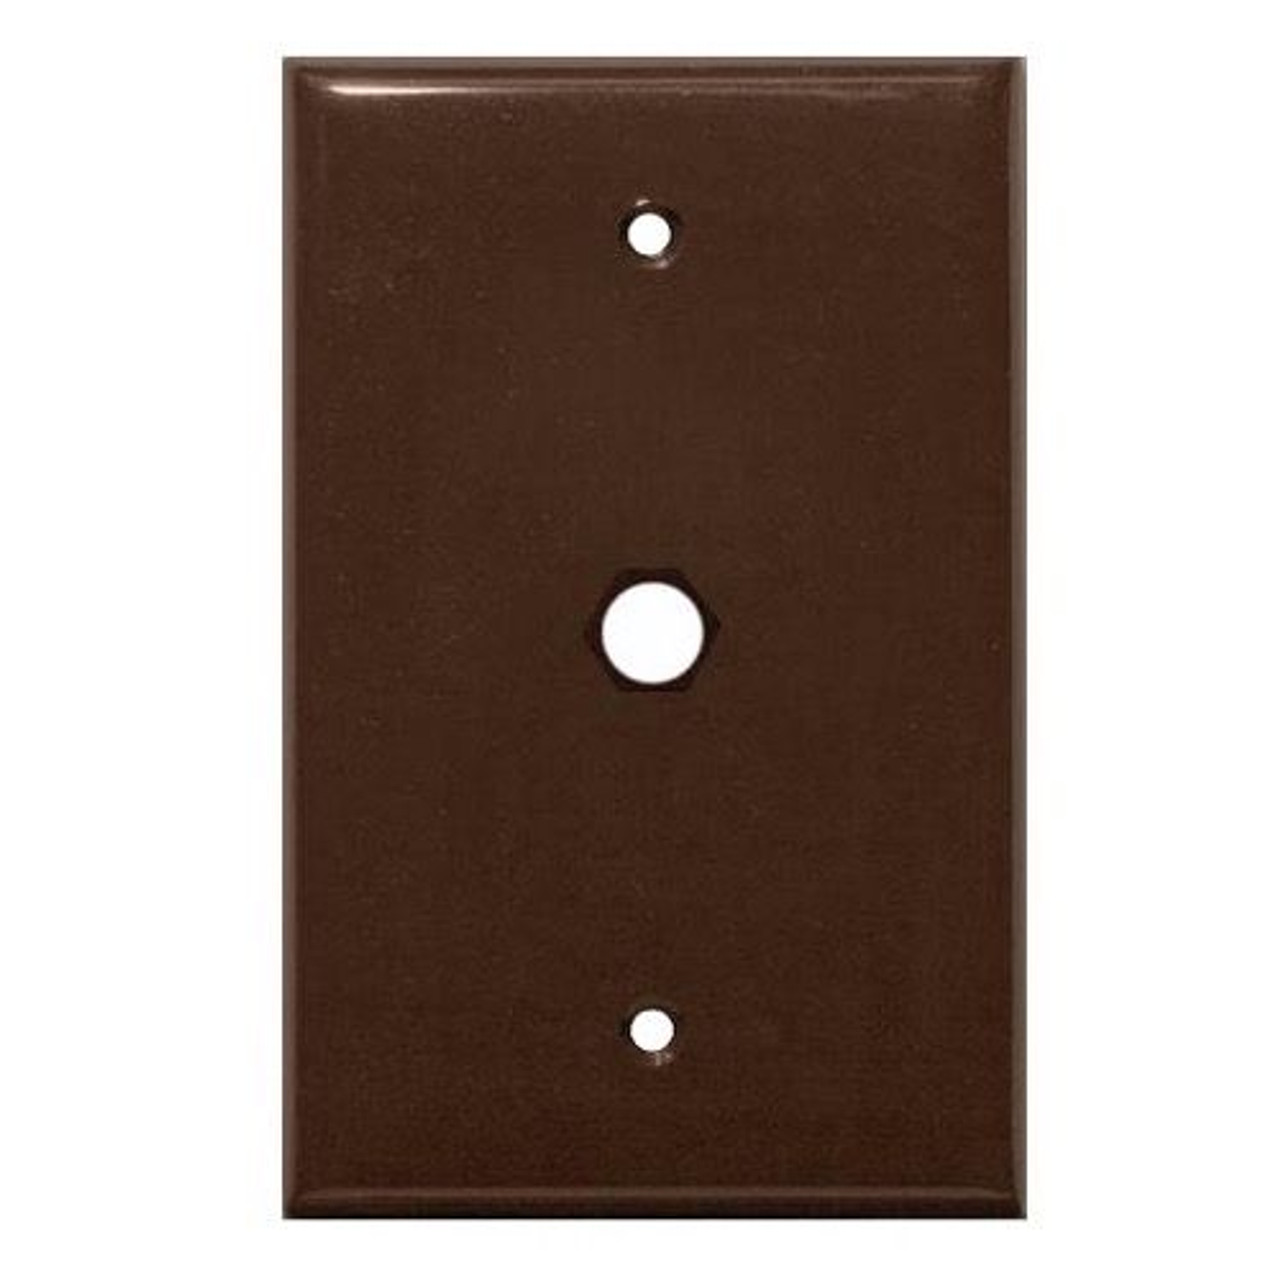 Steren 200-254BR Wall Plate Blank Brown 1-Hole Coaxial Port Single Gang Connector Audio Video Data Signal 75 Ohm Plug Connector Nylon Flush Mount Outlet Cover with Hole, Part # 200254-BR